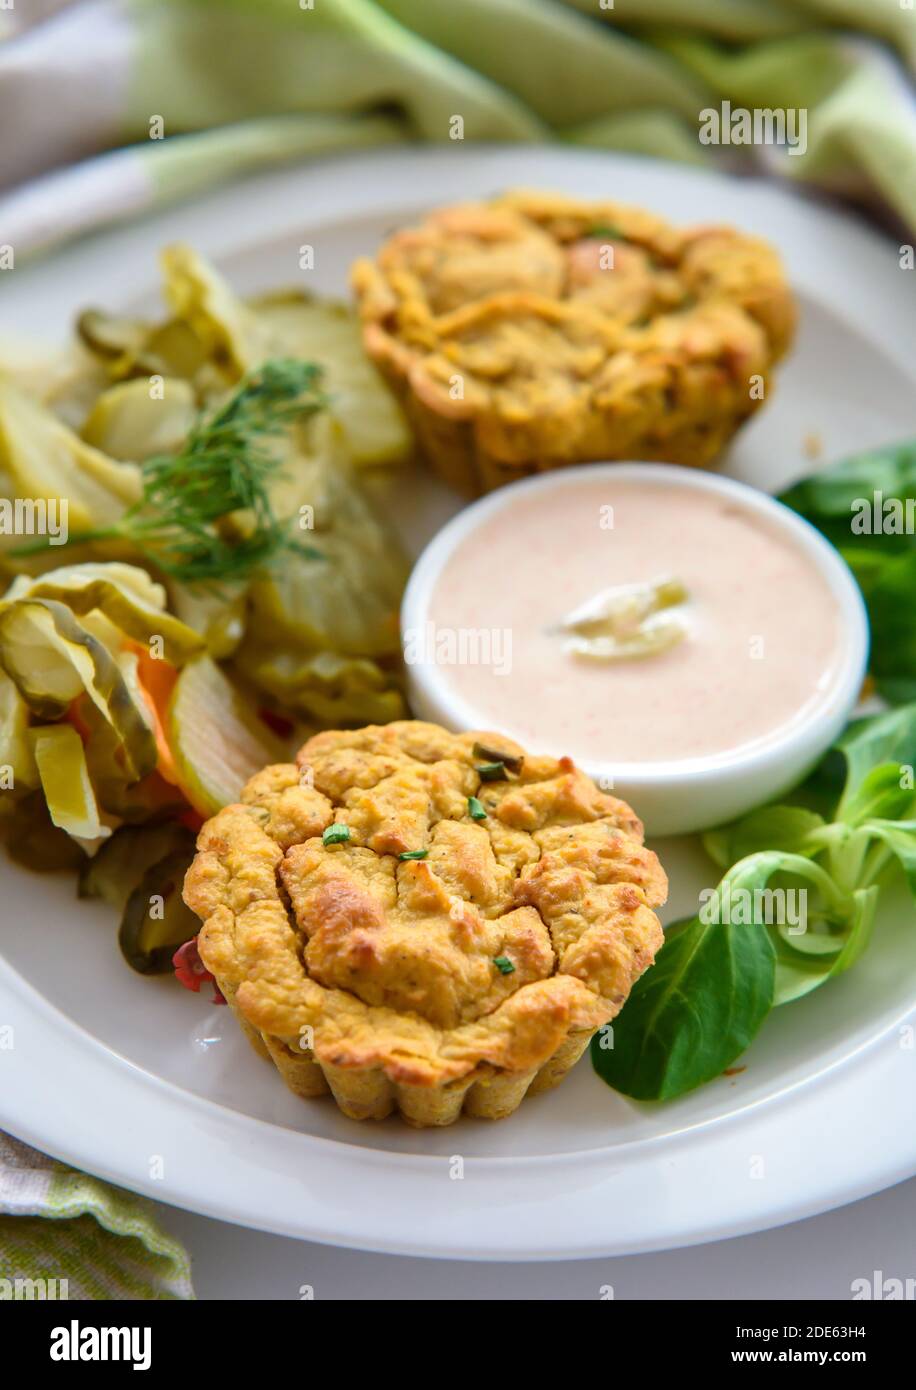 Healthy breakfast- vegetable muffins with light chili-mayo dip and cucumber pickle salad, close-up, early morning light Stock Photo